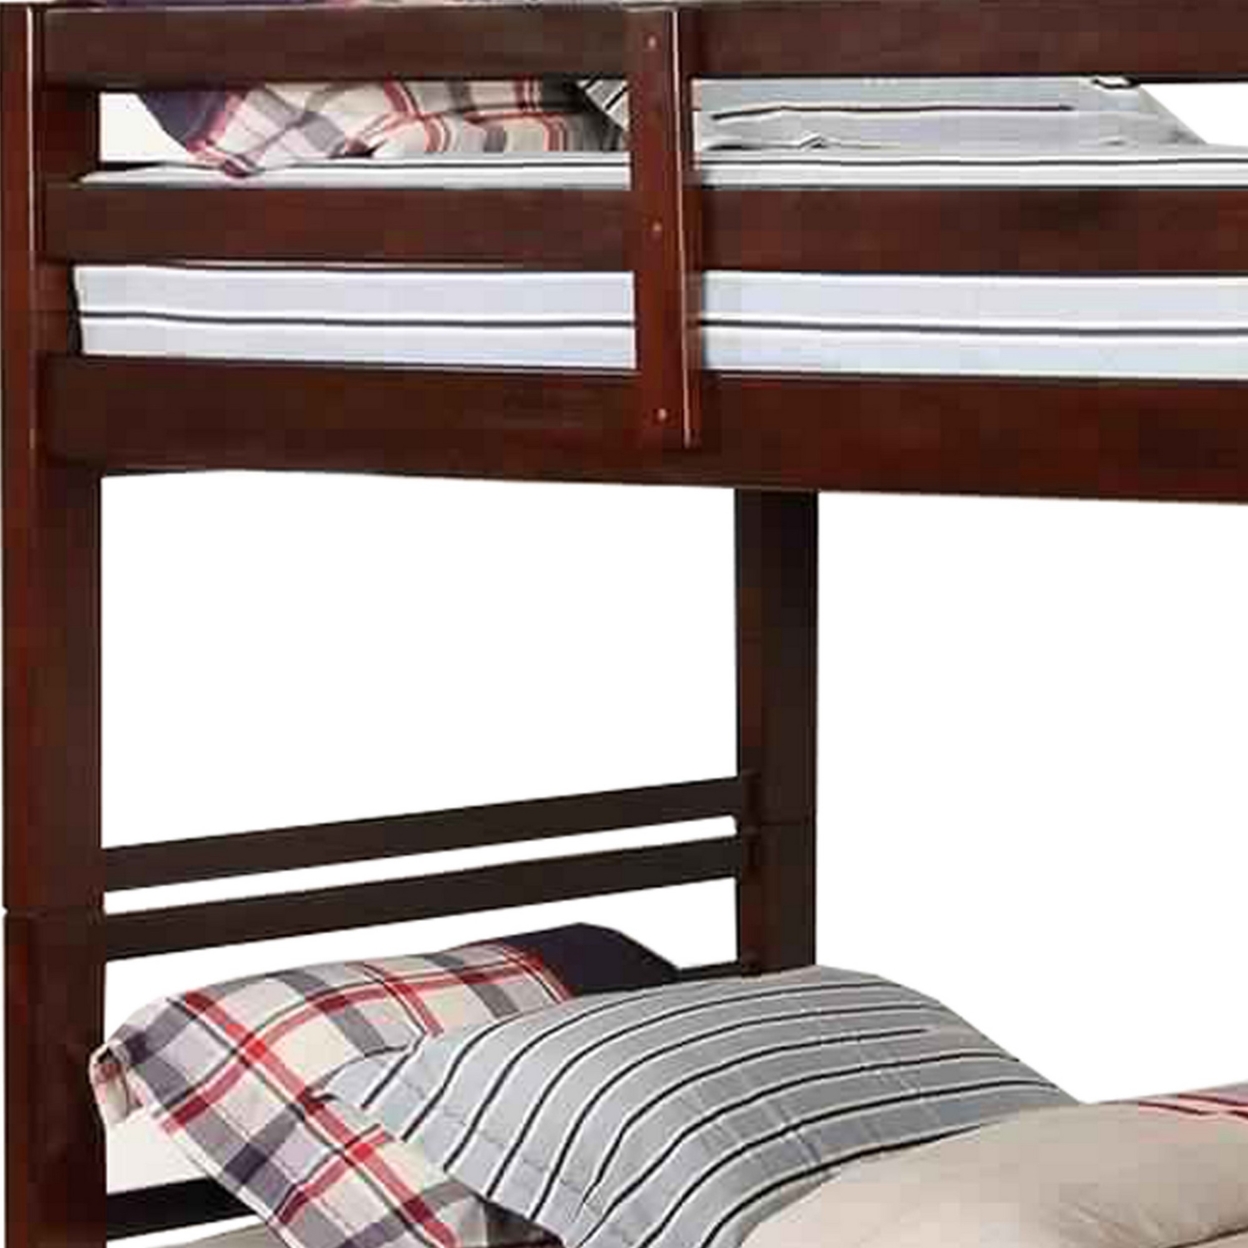 Transitional Twin Over Twin Bed With Attached Ladder And Drawers, Brown- Saltoro Sherpi